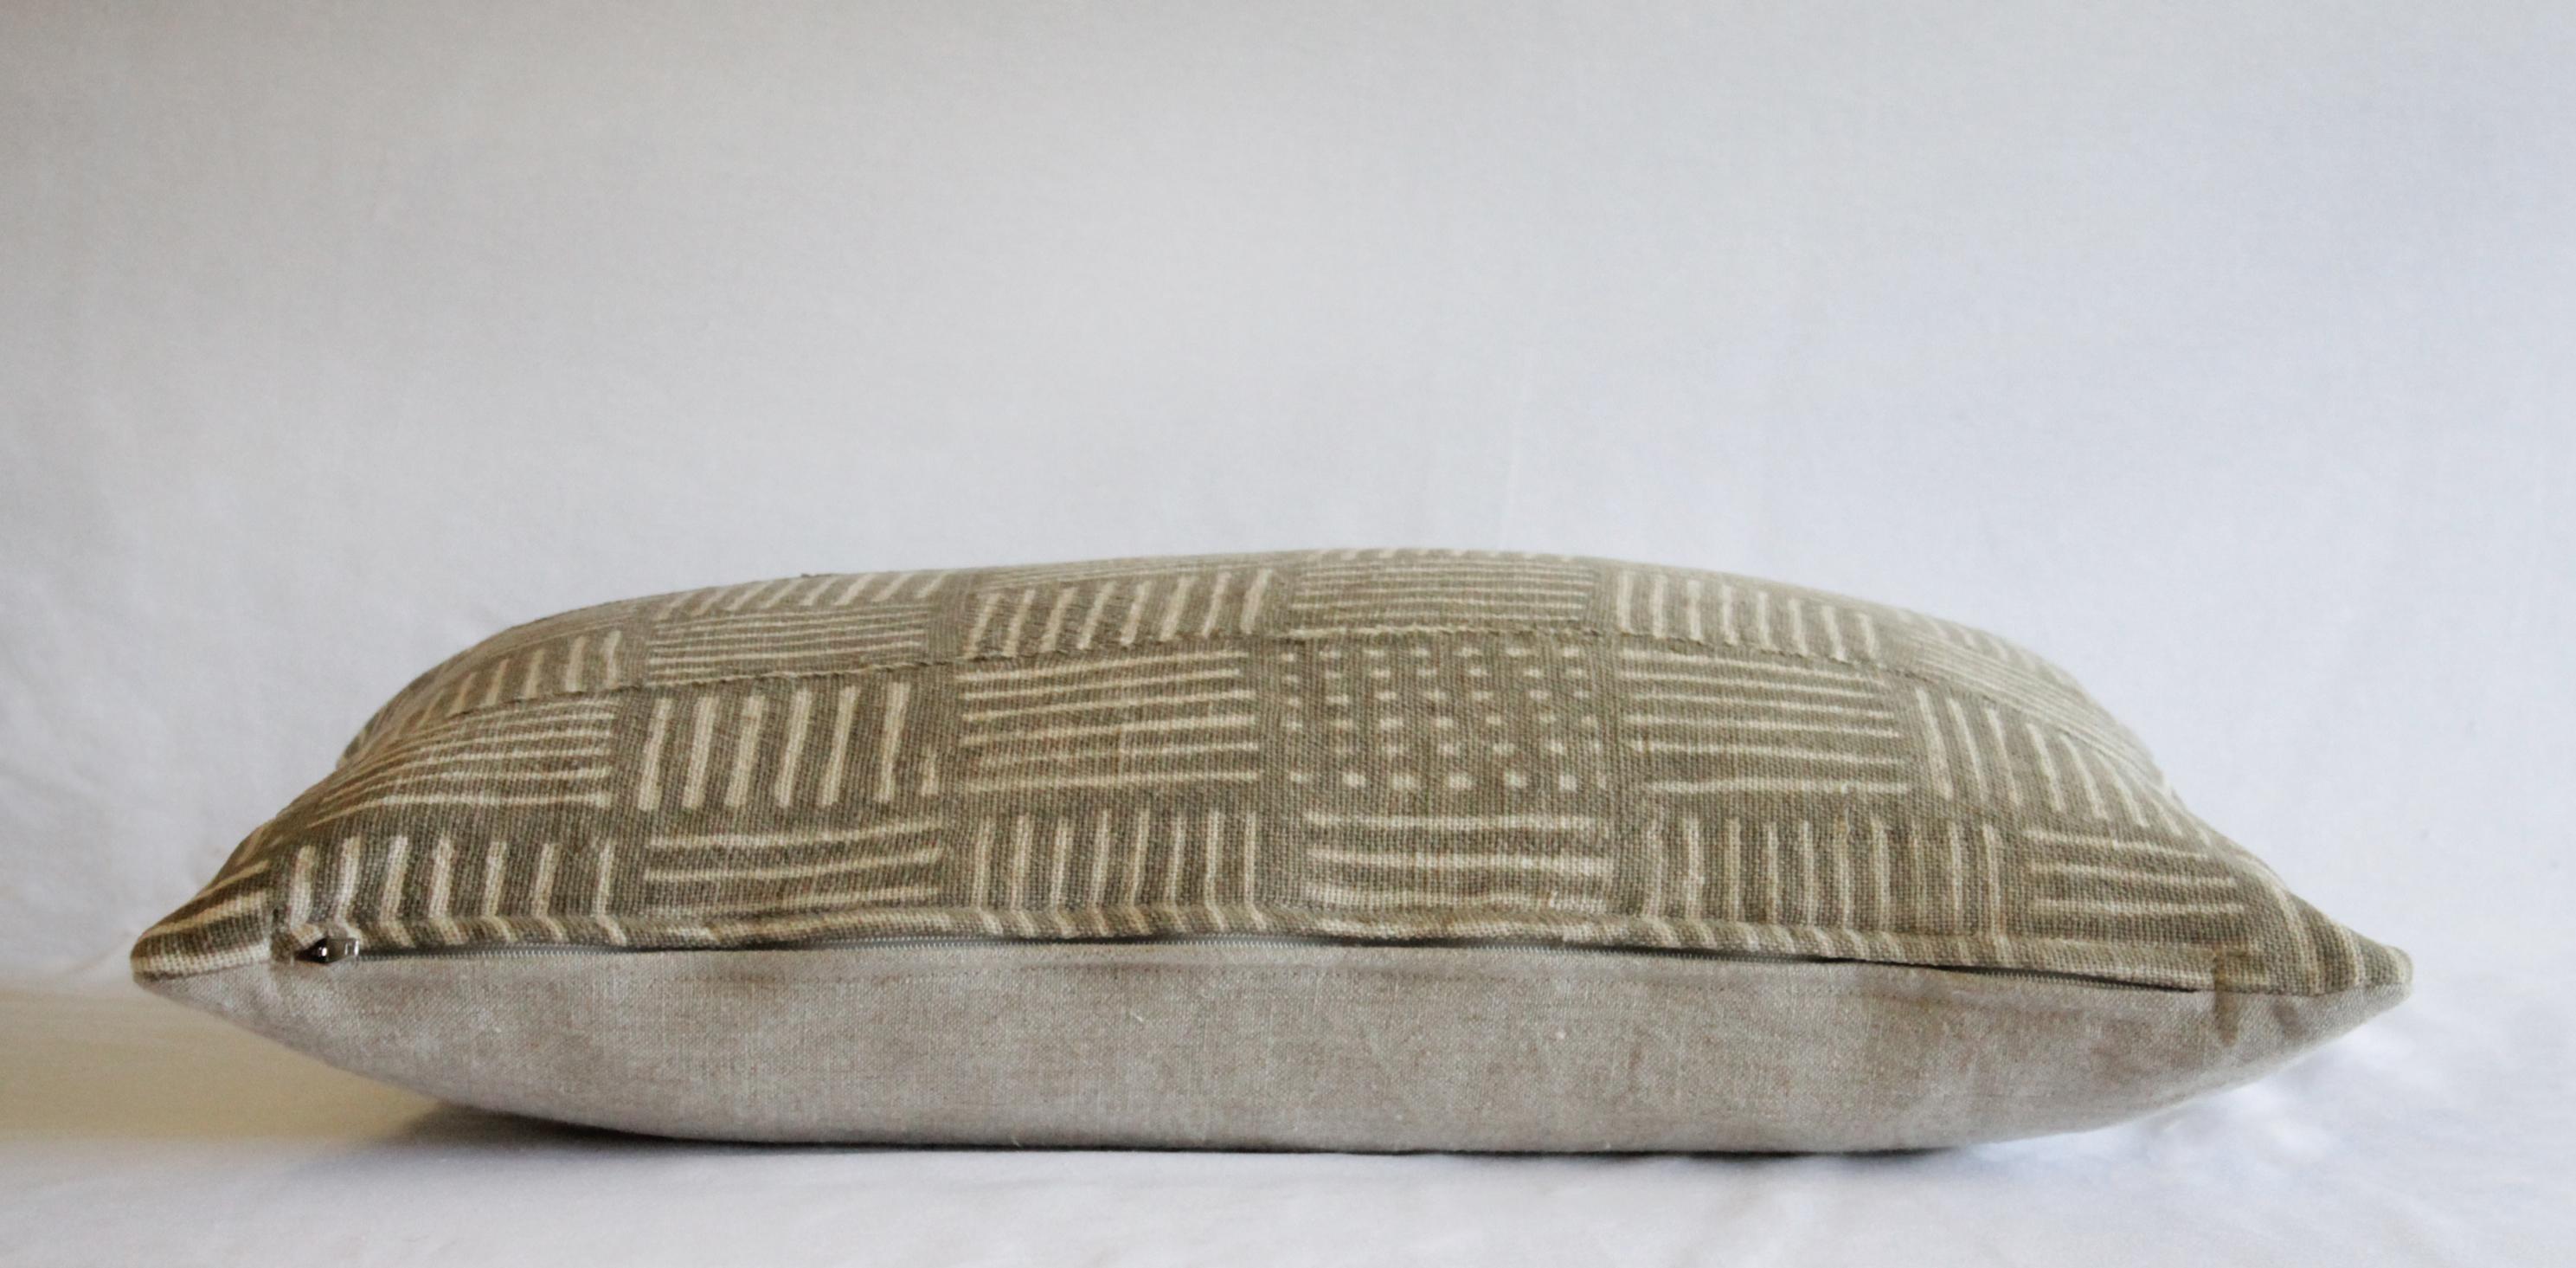 Antique tribal brown and cream nubby textile pillow.
 The backing is a nubby Belgian flax linen, natural color. Hidden zipper closure, insert sold separately. 
Measues: 14